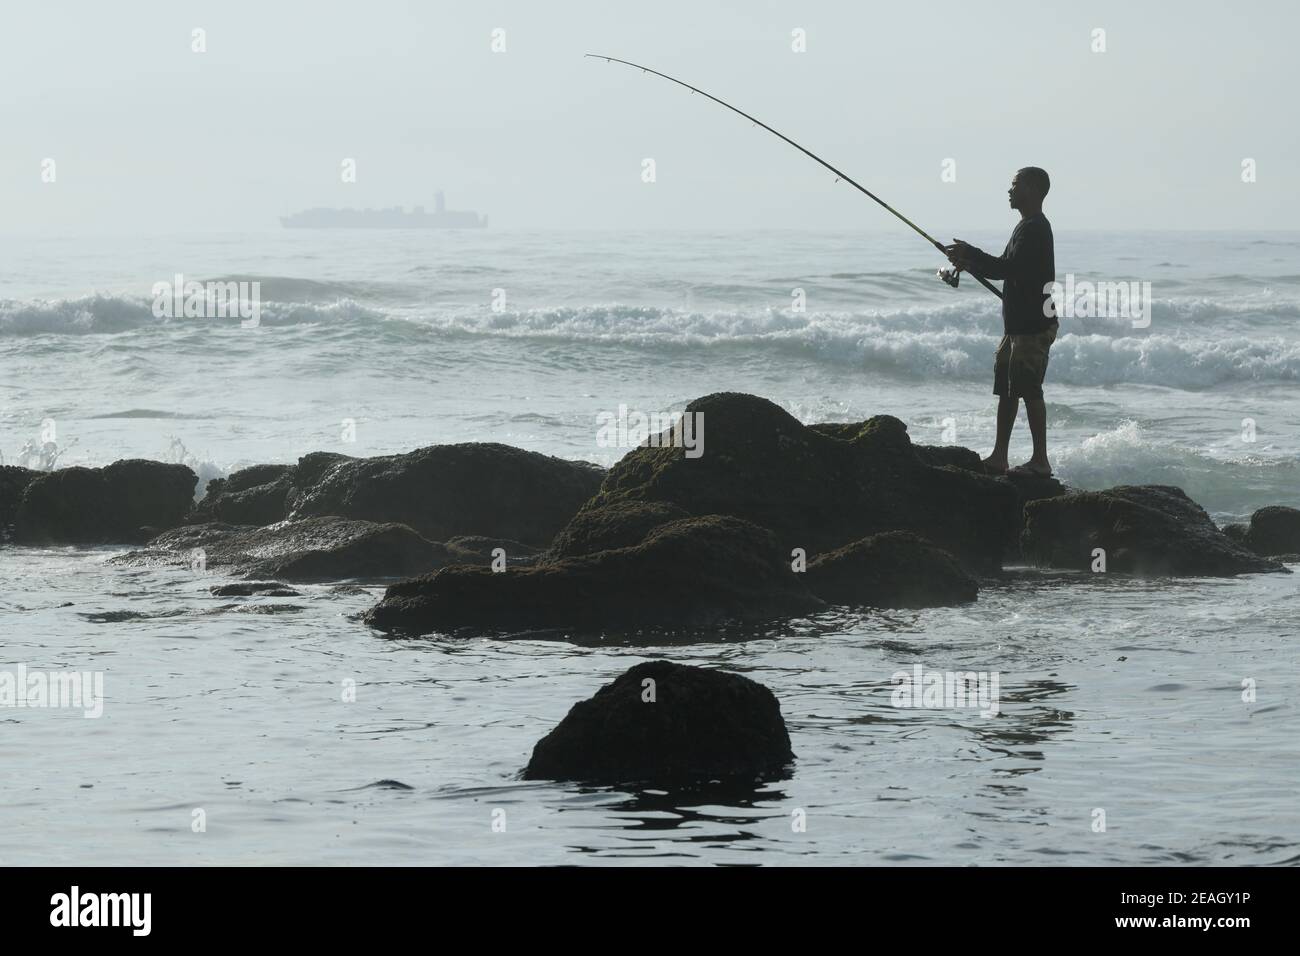 Sport fishing, people, single adult man catching fish, seaside, Umhlanga Rocks, Durban, South Africa, beautiful seascape, silhouette, outdoor activity Stock Photo